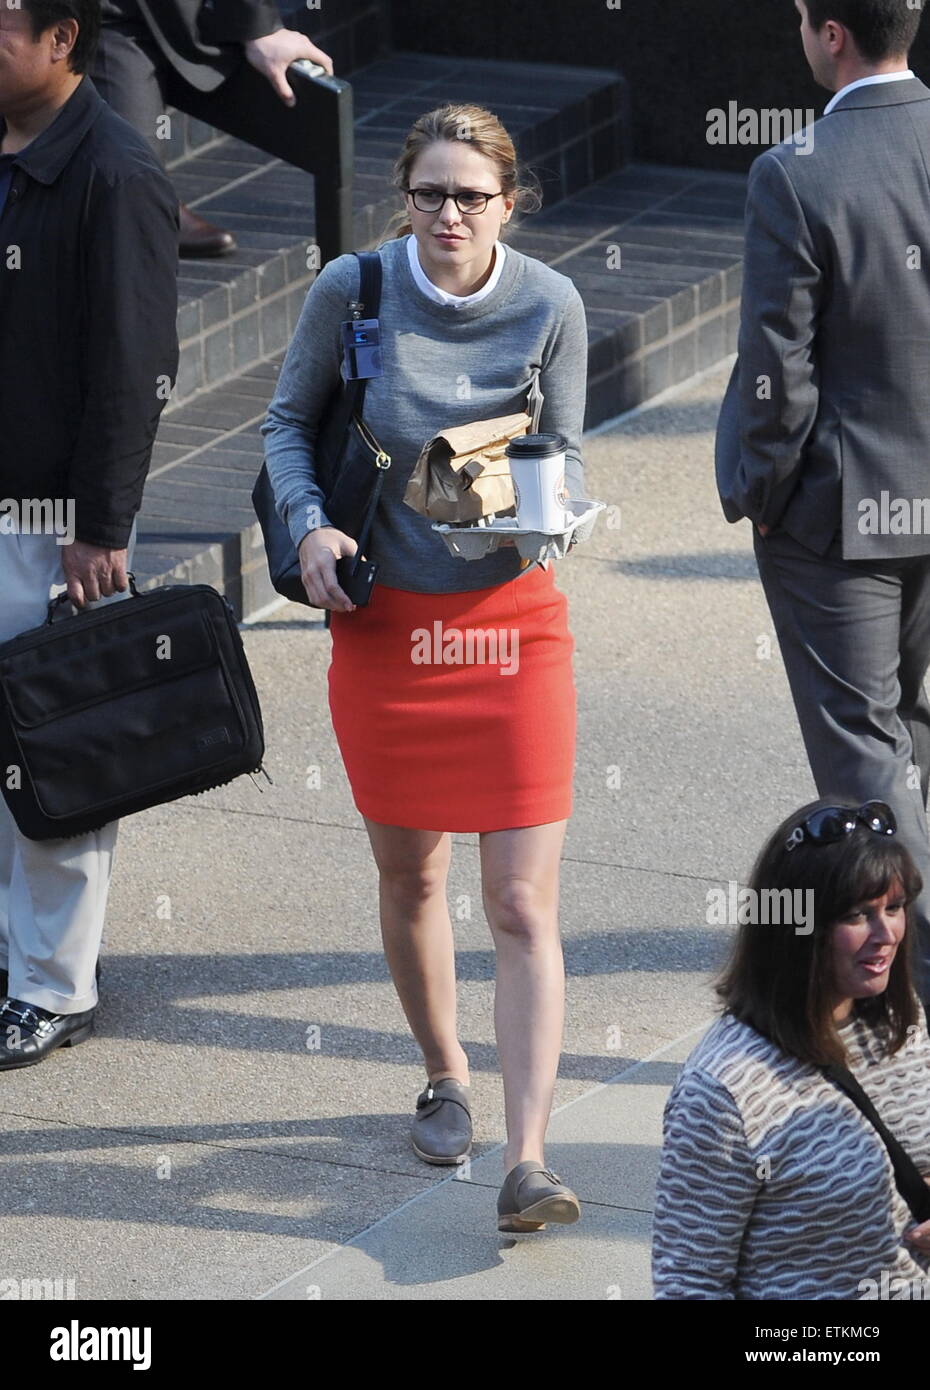 Glee star Melissa Benoist spotted on the set of her new pilot tv series 'Supergirl' filming in downtown Los Angeles. The actress will be playing the role of supergirl along side with Calista Flockhart and Dean Cain.  Featuring: Melissa Benoist Where: Los Angeles, California, United States When: 09 Mar 2015 Credit: Cousart/JFXimages/WENN.com Stock Photo